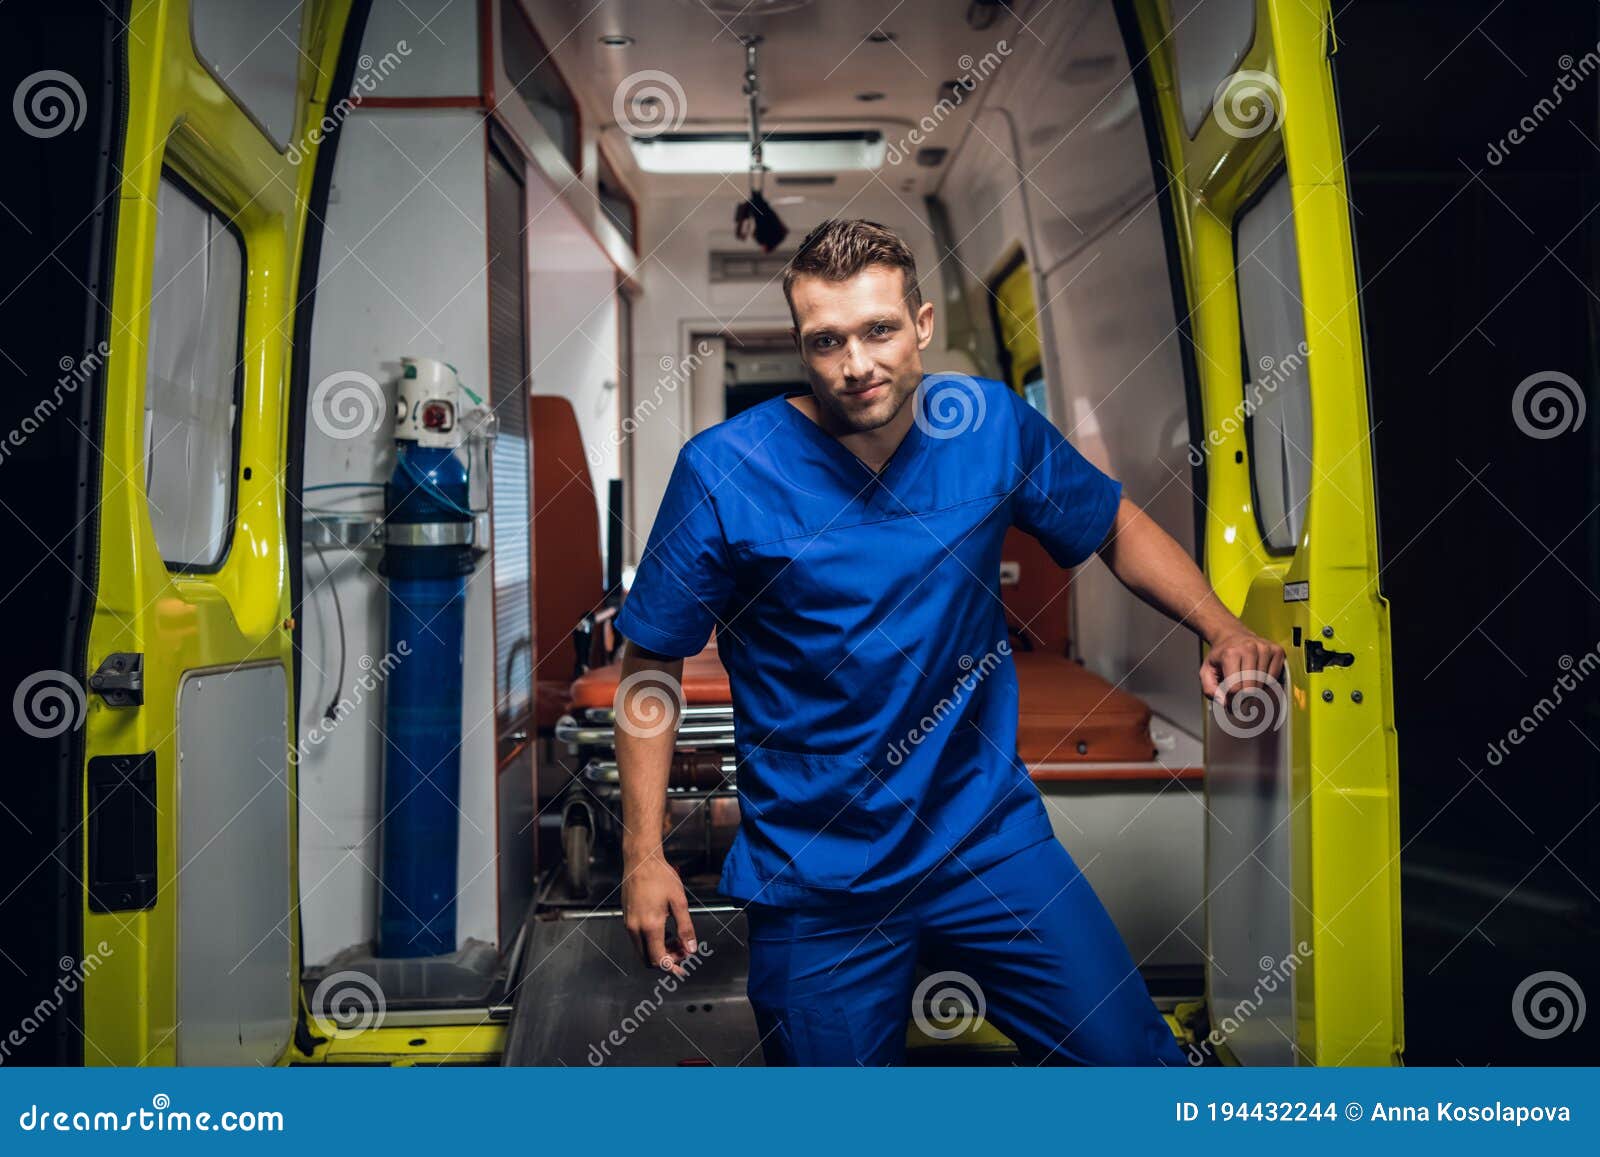 Young Paramedic Giving An Oxygen Mask To His Female Patient In An Ambulance Car Stock Image 